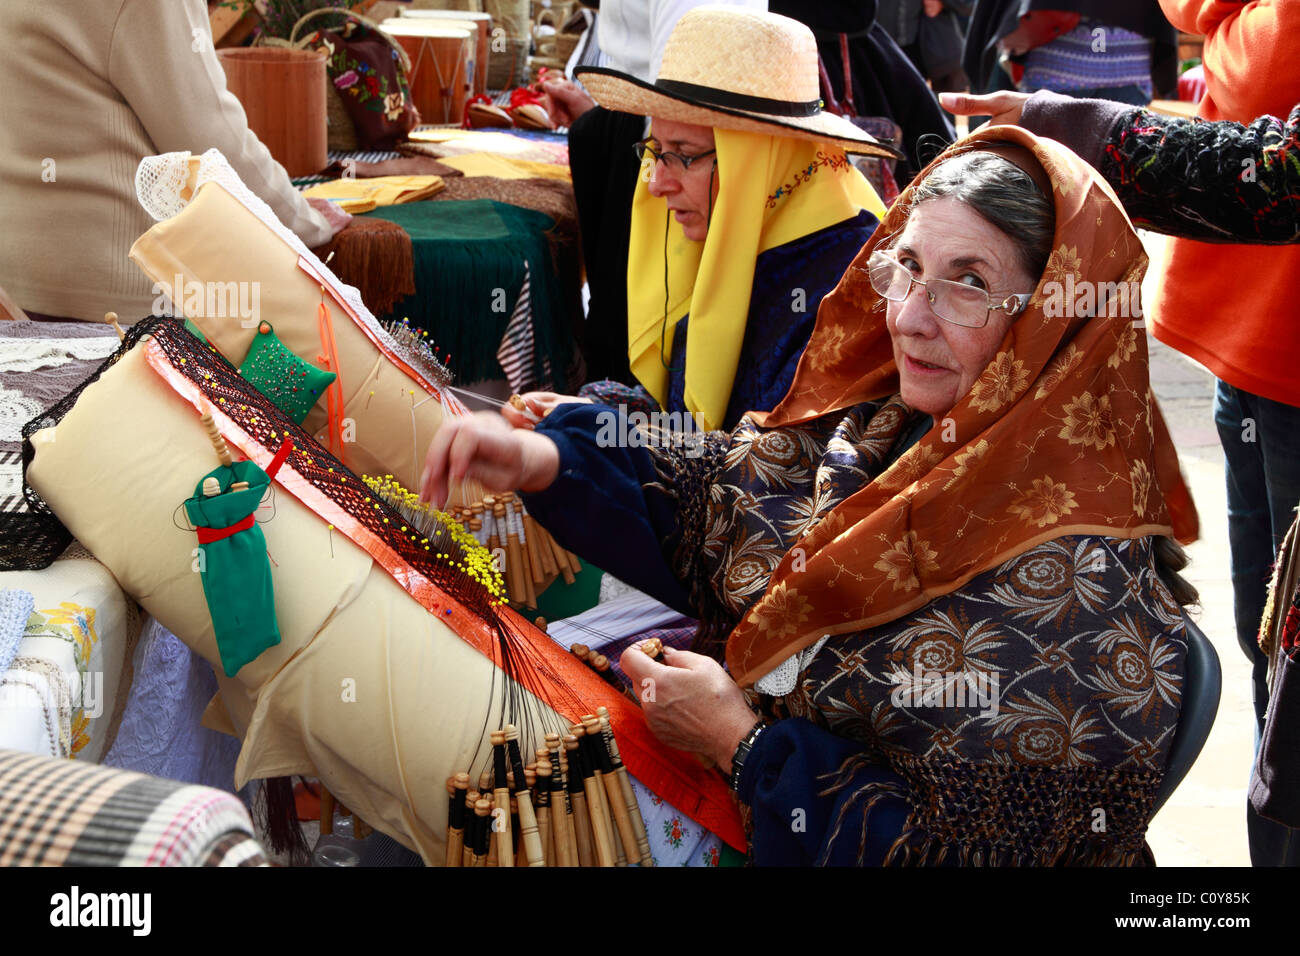 Elderly lades in traditional costume embroidering at a Handicraft Fair, Ibiza, Spain Stock Photo